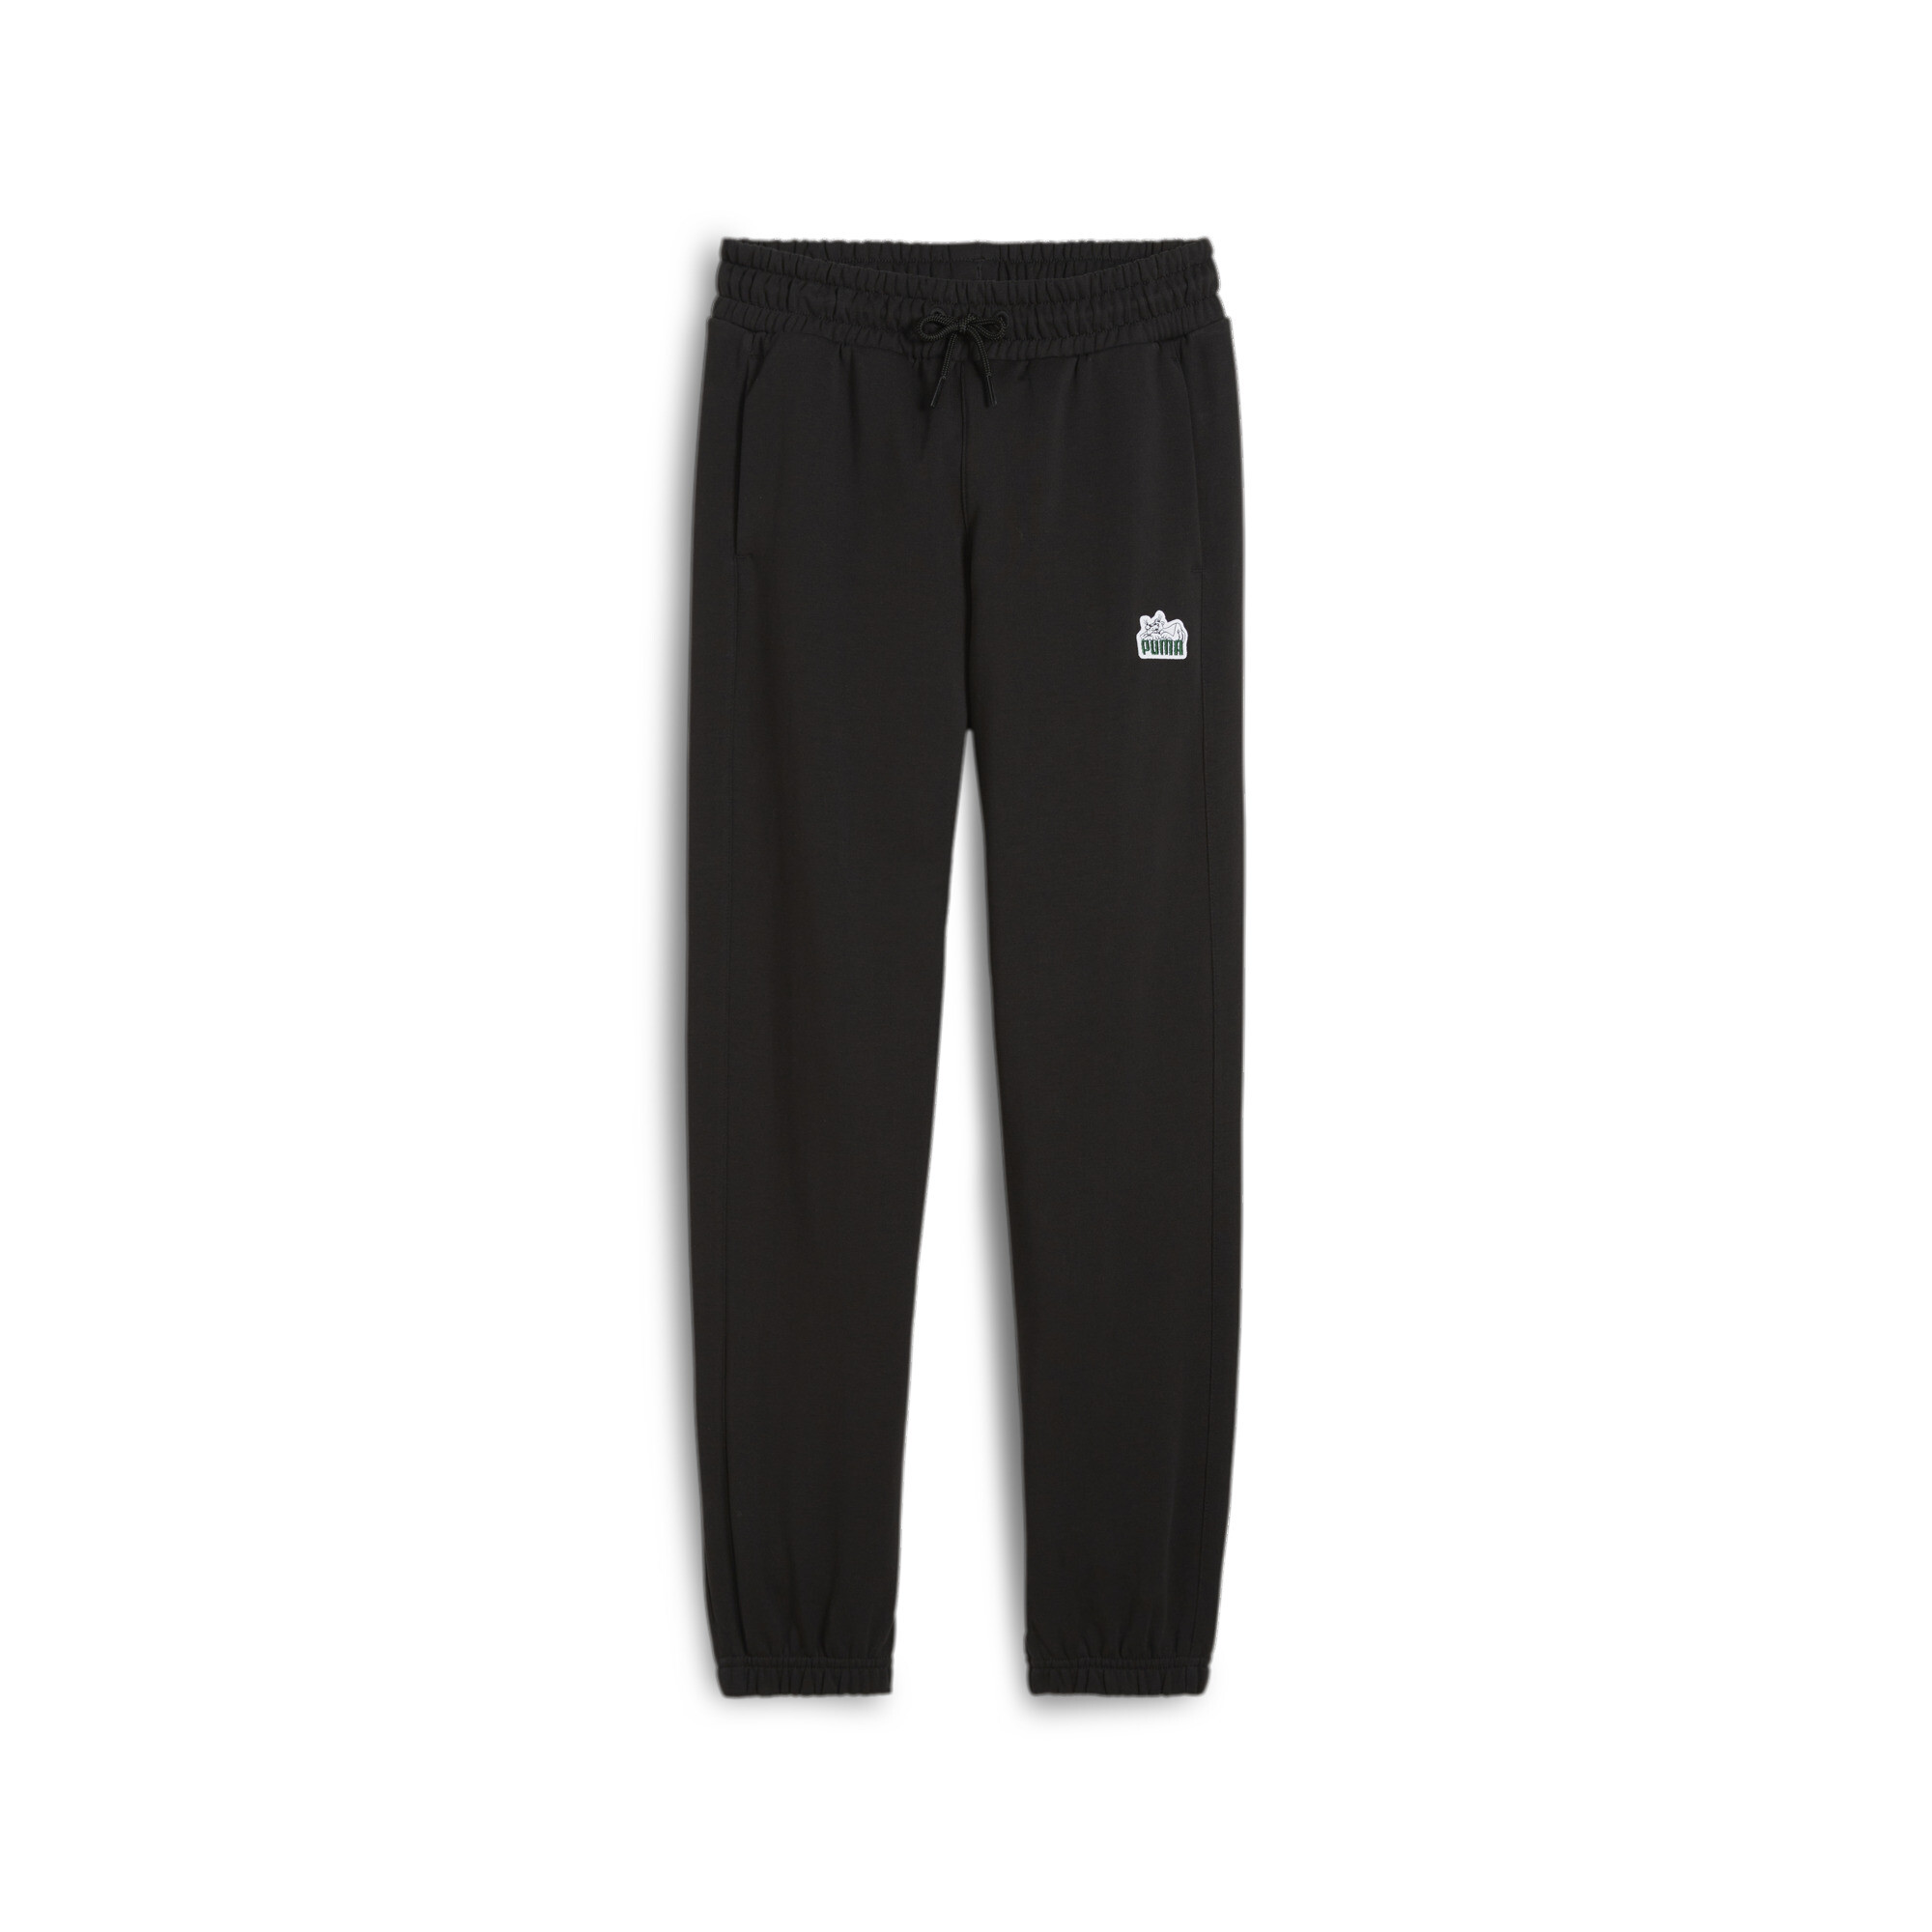 PUMA FOR THE FANBASE Sweatpants In Black, Size 7-8 Youth